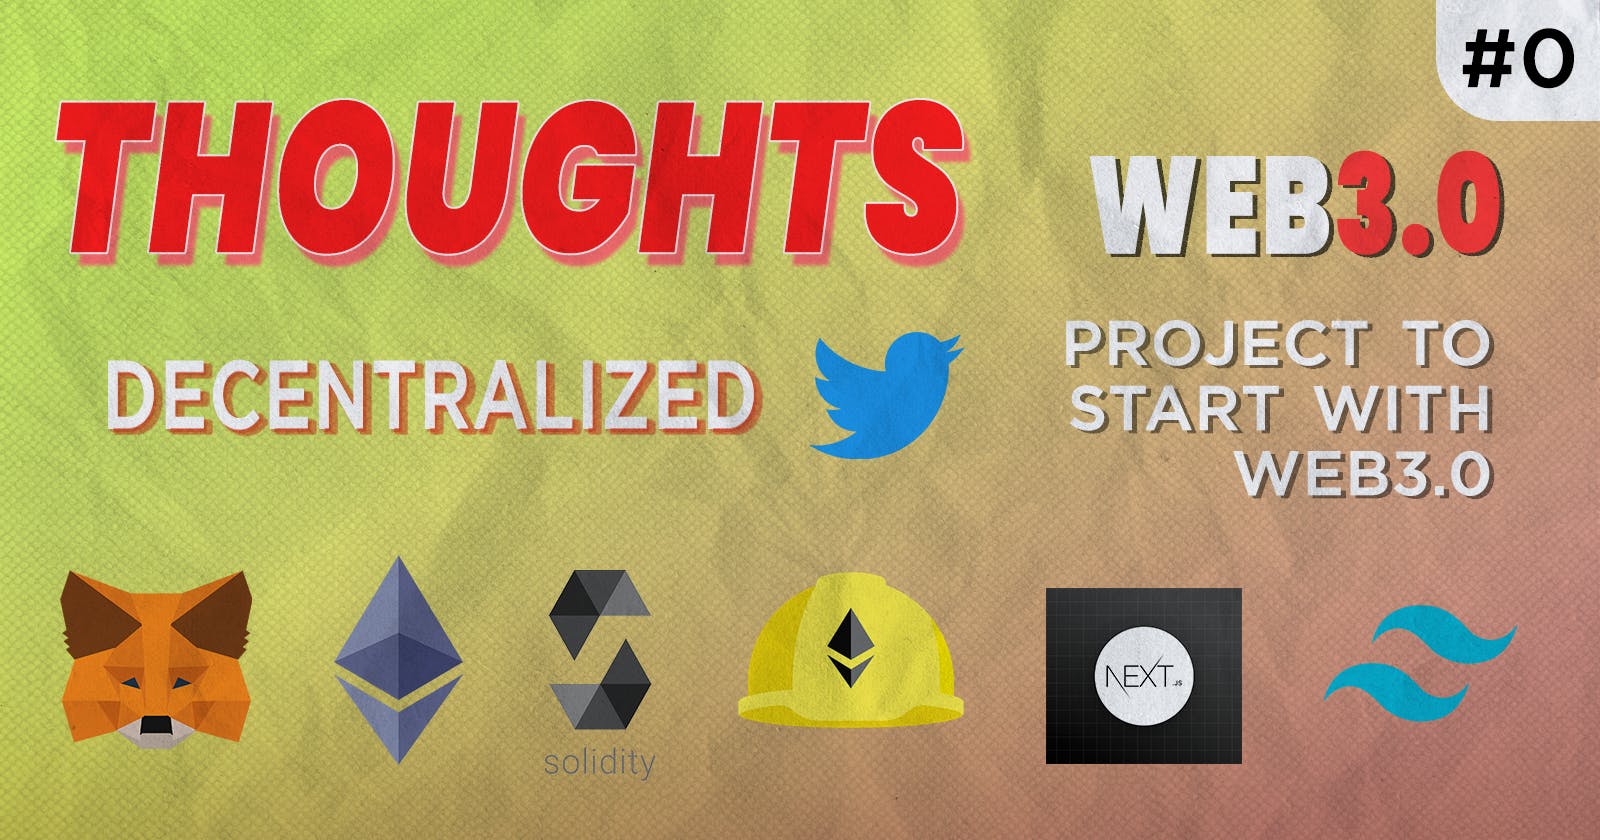 Thoughts - decentralized Twitter-like app (web3.0)